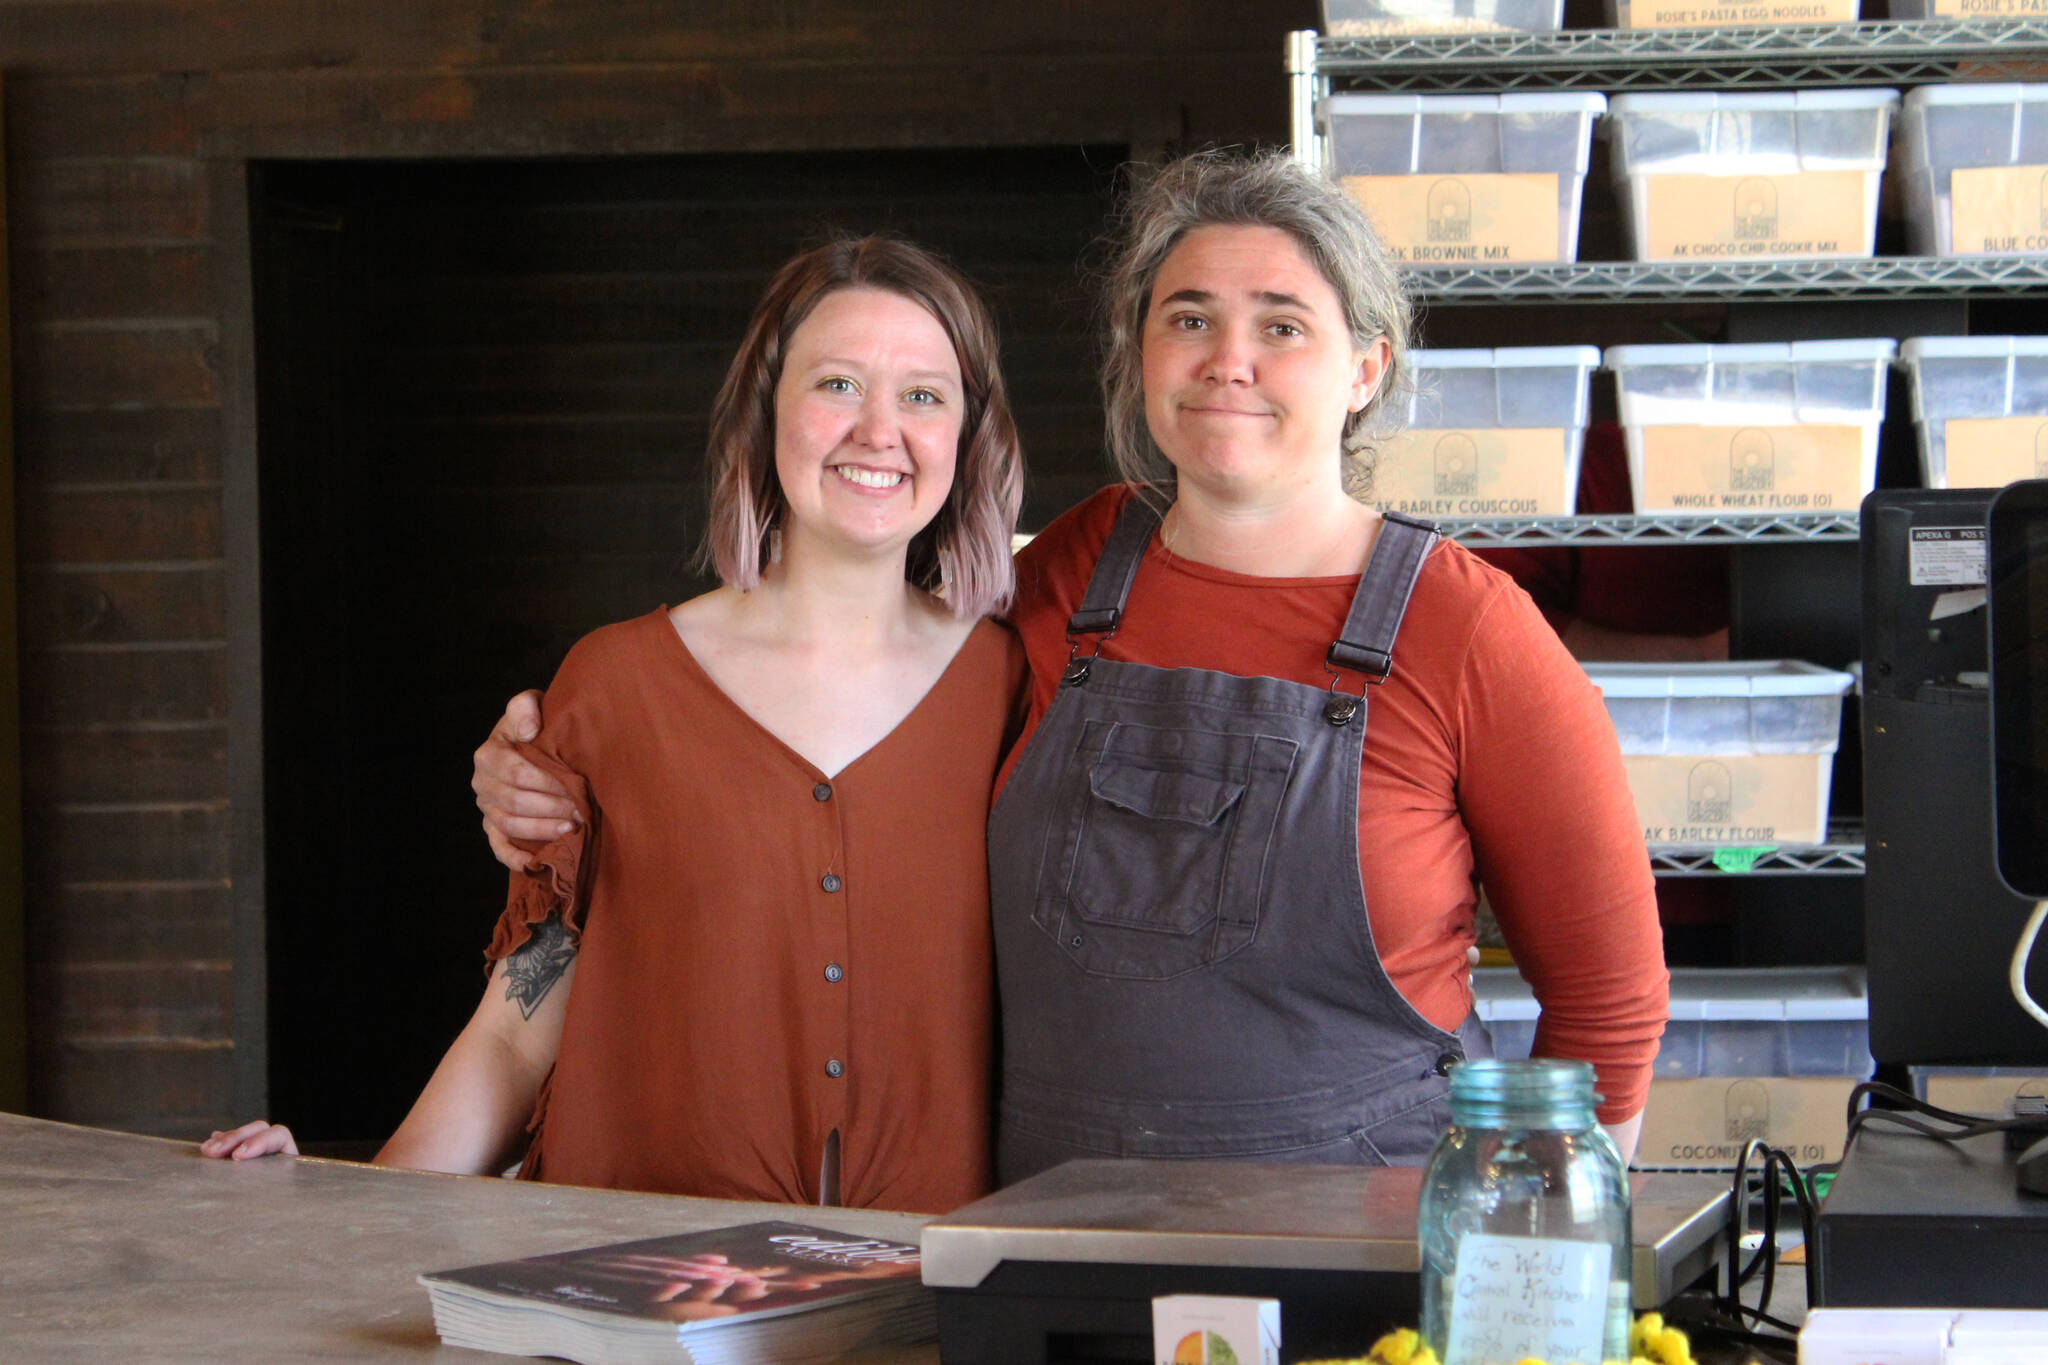 Anastasia Scollon (left) and Willow King (right) stand in The Goods + Sustainable Grocery and Where it’s At mindful food and drink on Monday, May 16, 2022 in Soldotna, Alaska. (Ashlyn O’Hara/Peninsula Clarion)